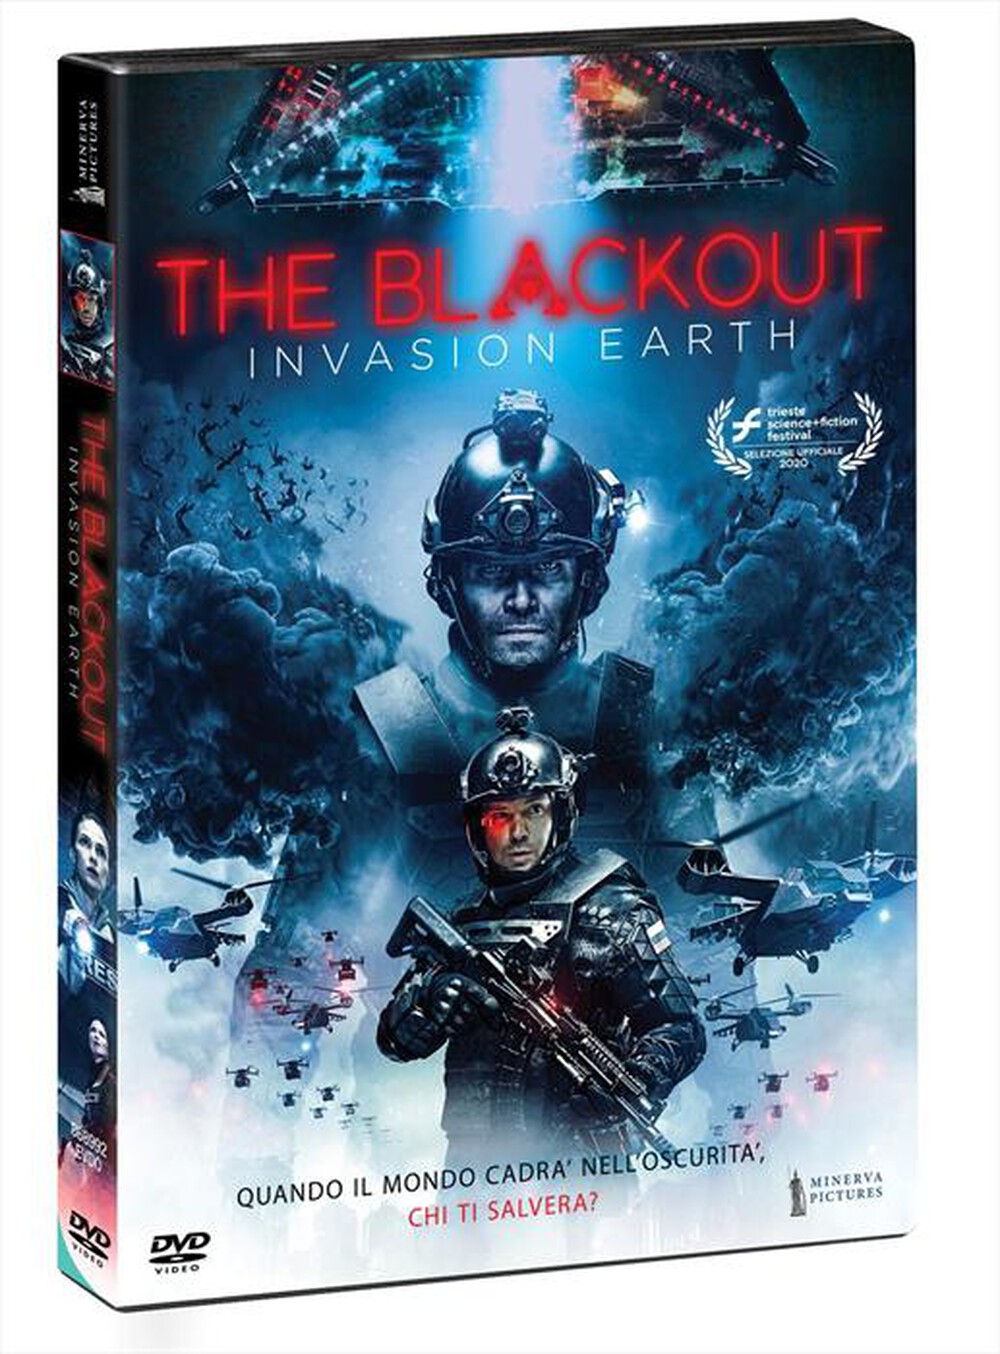 "Minerva Pictures - Blackout (The) - Invasion Heart"